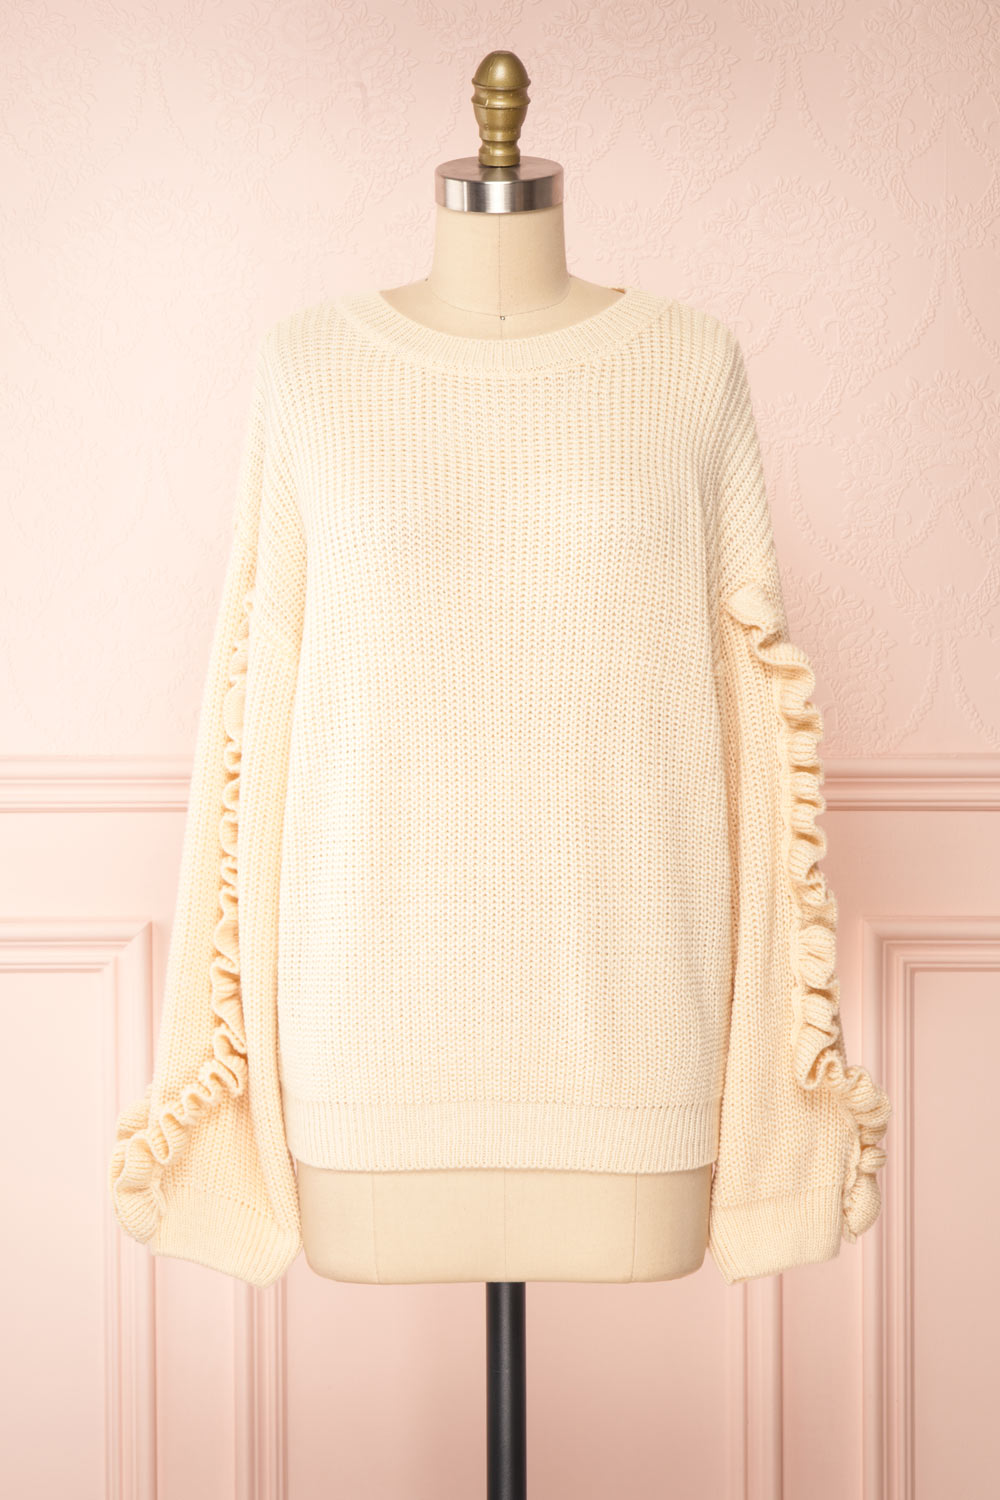 Idelle Ivory Knit Sweater w/ Frills on Sleeves | Boutique 1861 front view 